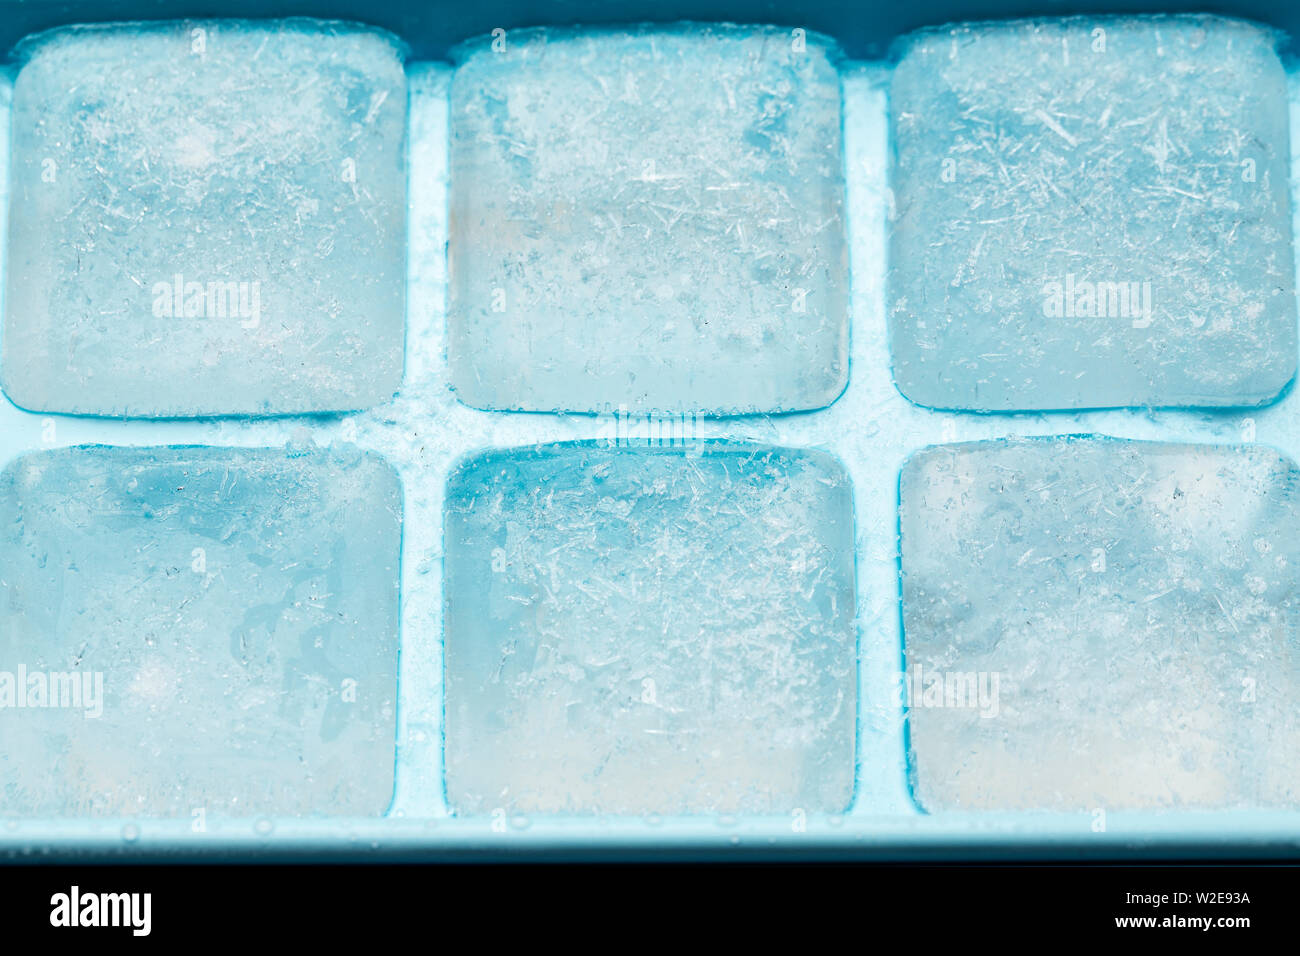 Wc ice cube. Pour Water into Ice Cube Tray. Лед для напитков из бумаги шаблоны. Pour Water into Ice Cube Tray cartoon.